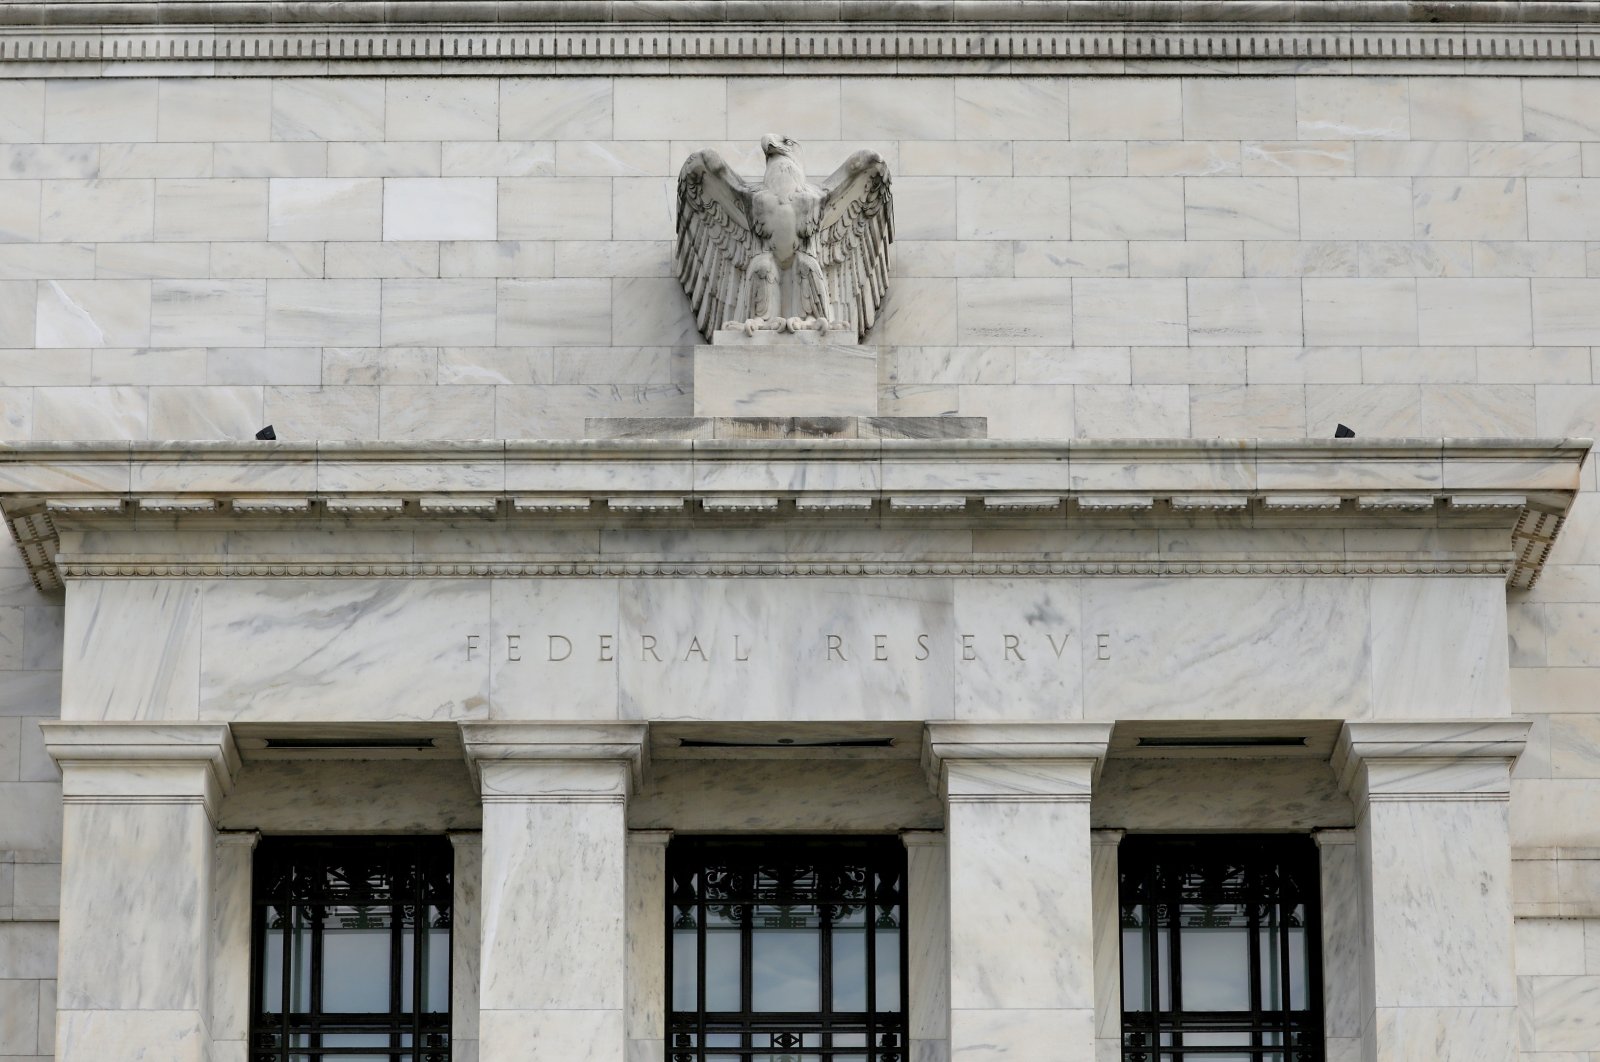 The Federal Reserve building is pictured in Washington, DC, U.S., Aug. 22, 2018. (Reuters File Photo)